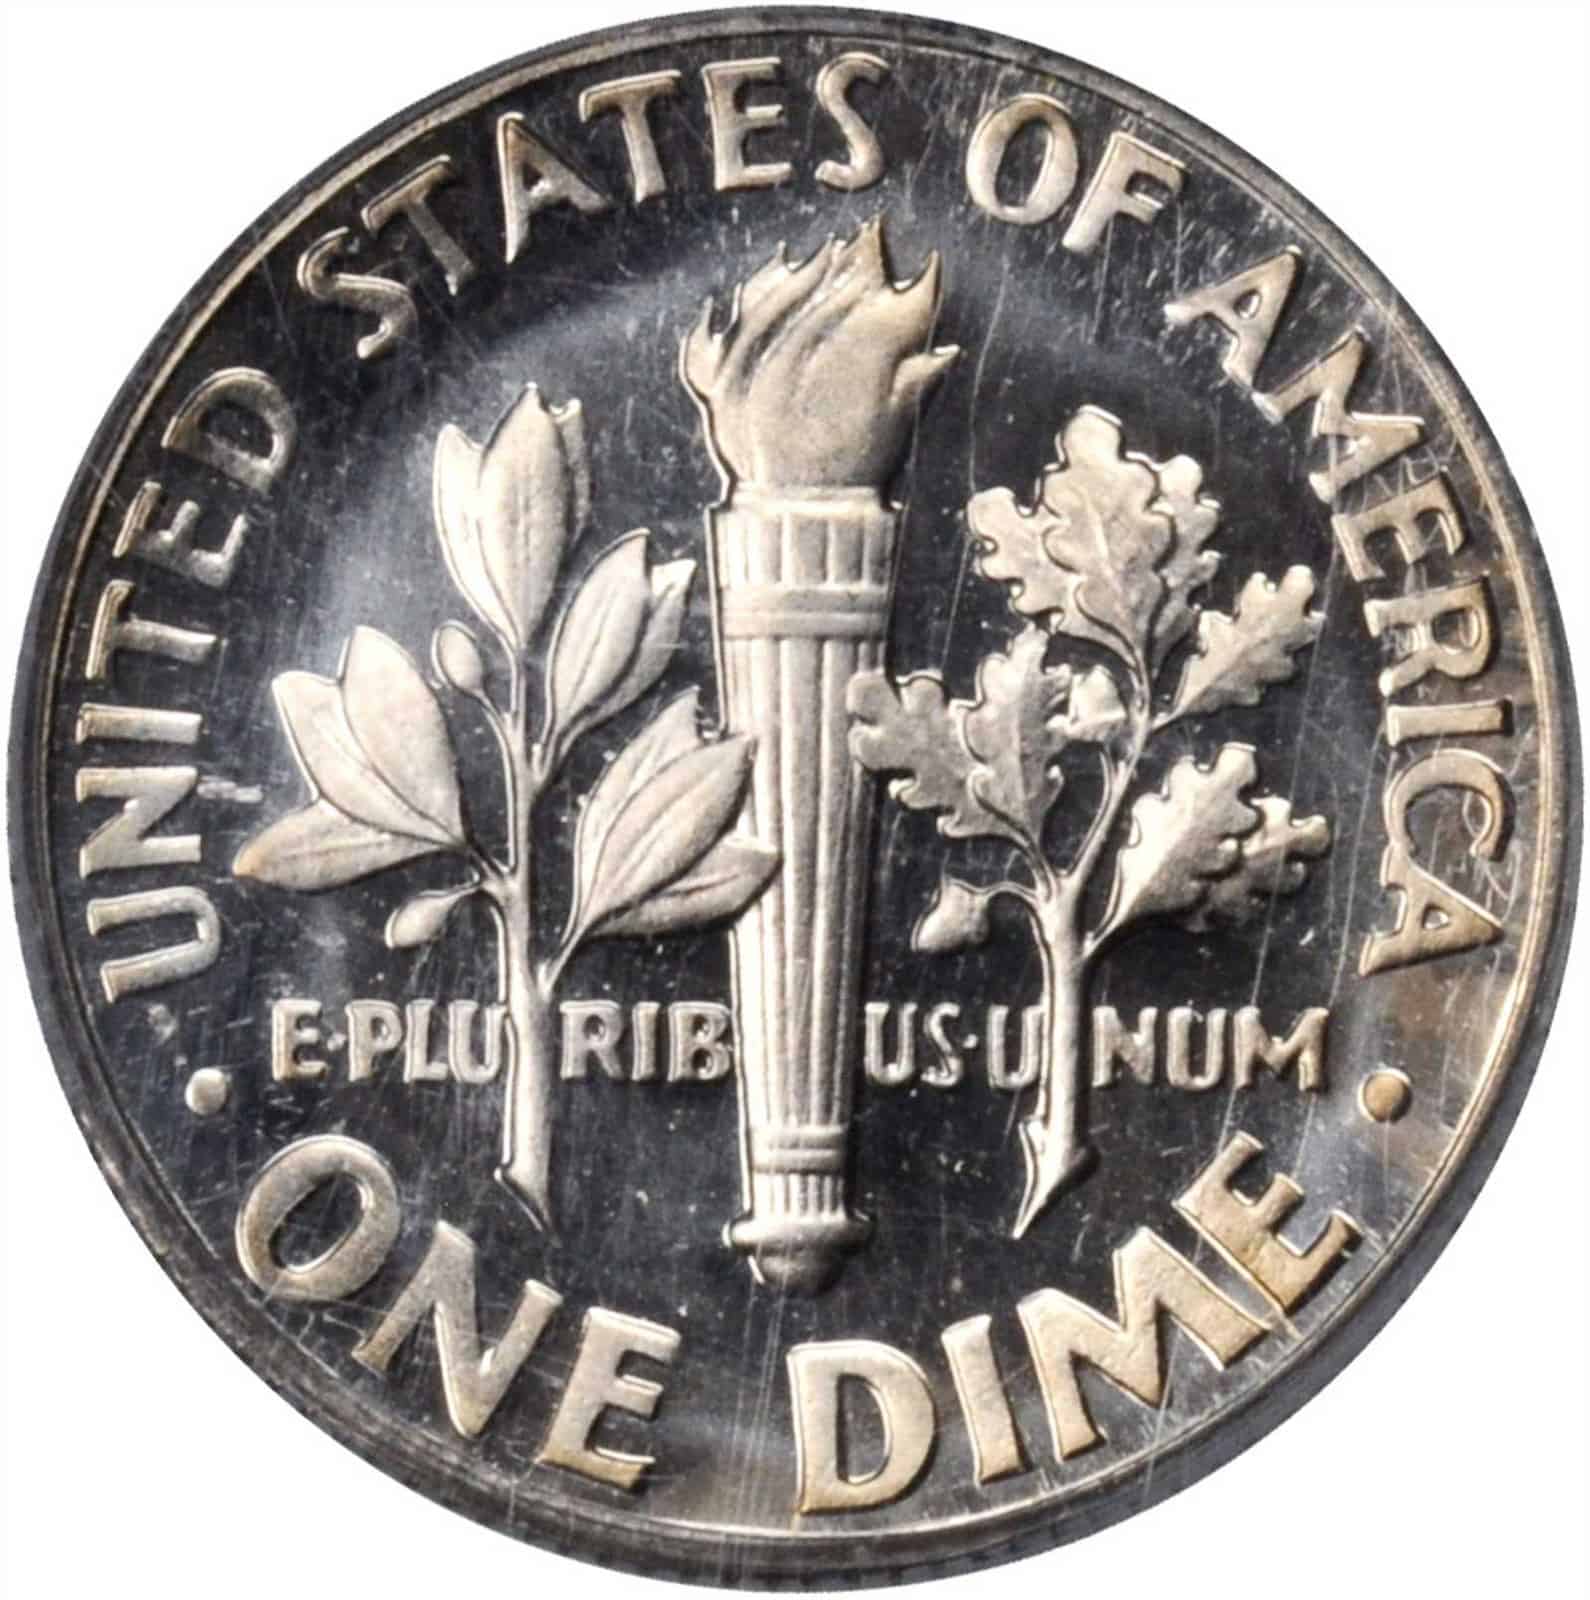 The reverse of the 1970 Roosevelt dime